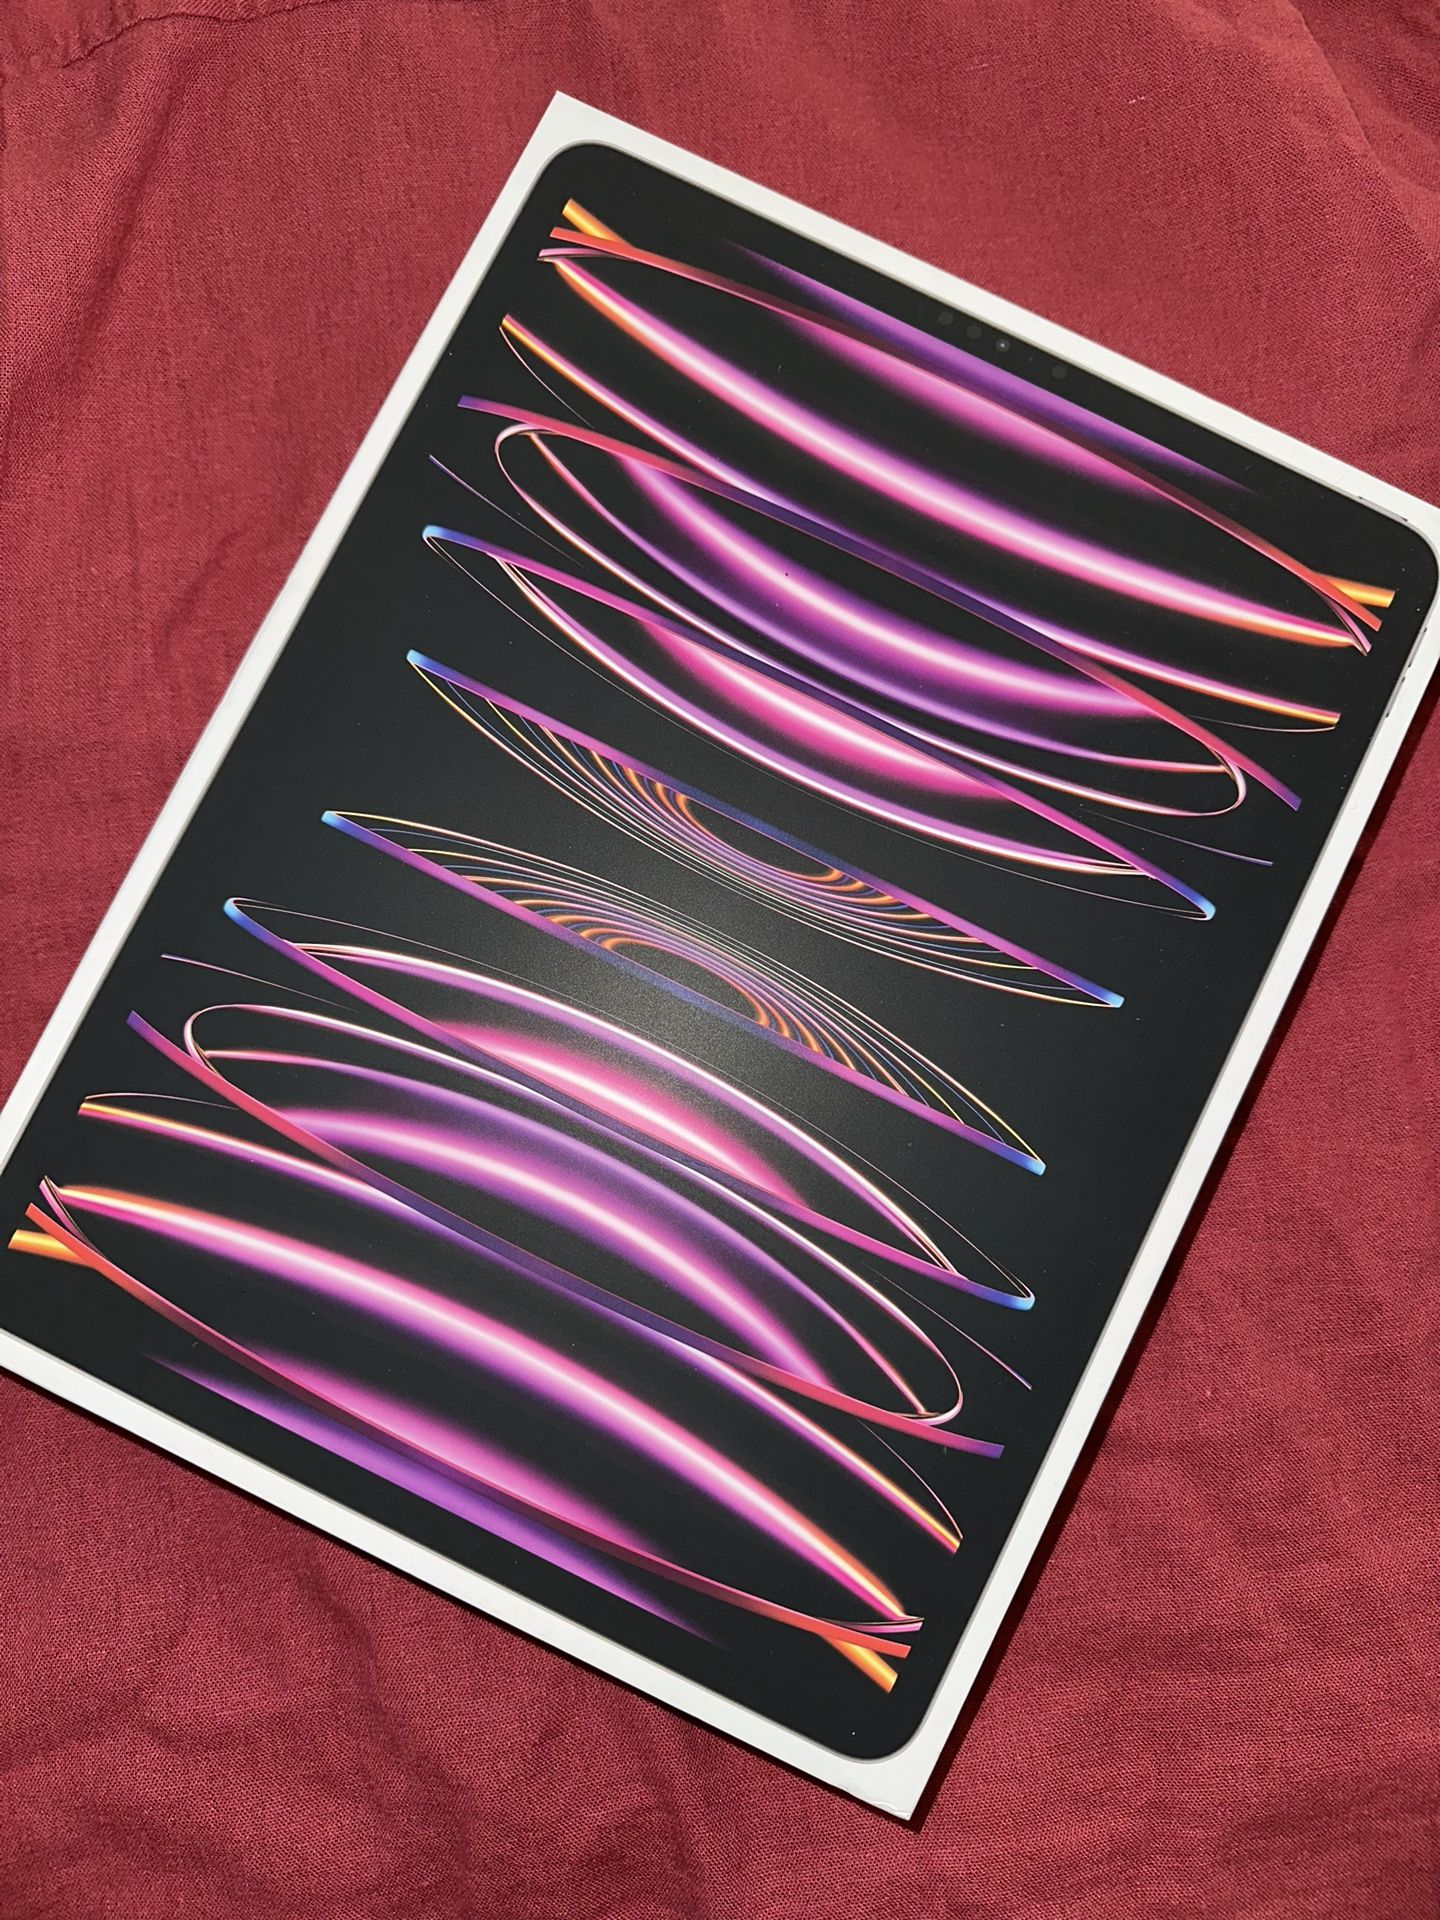 Apple iPad Pro 12.9 256gb 6th Gen Space Gray 5G Cellular + Wifi New Sealed M2 Chip Comes With Receipt 